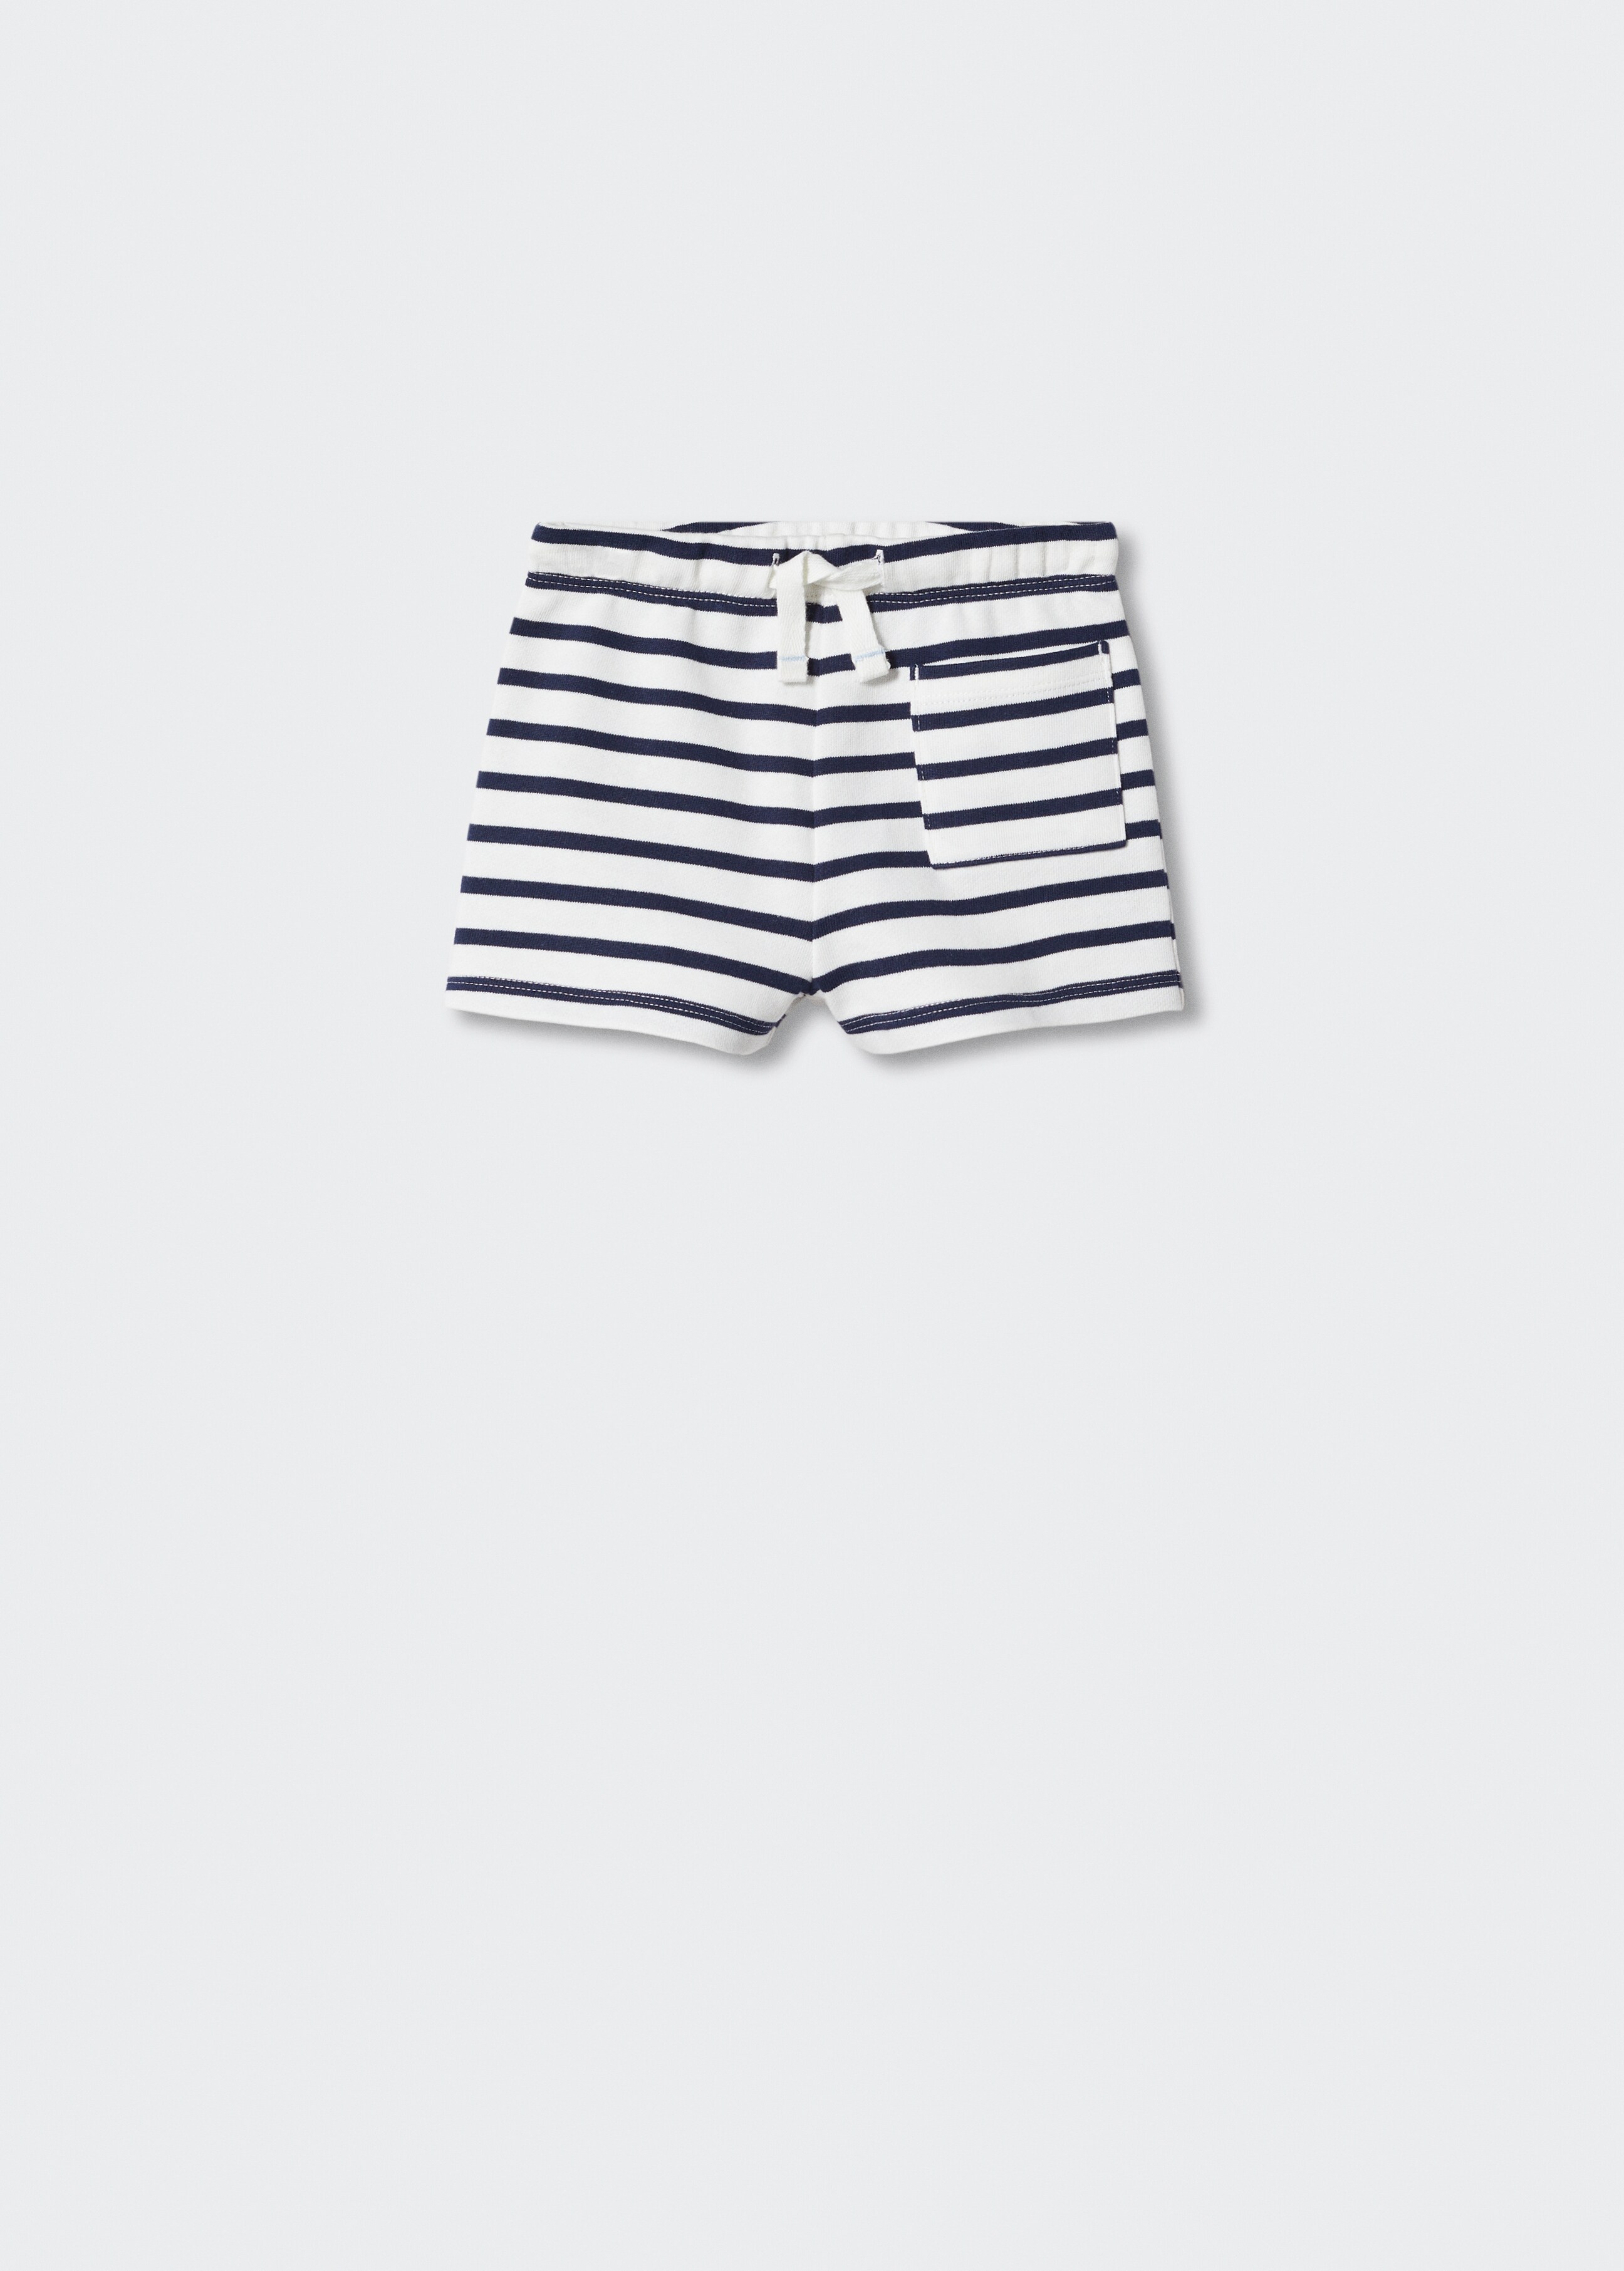 Cotton striped shorts - Article without model